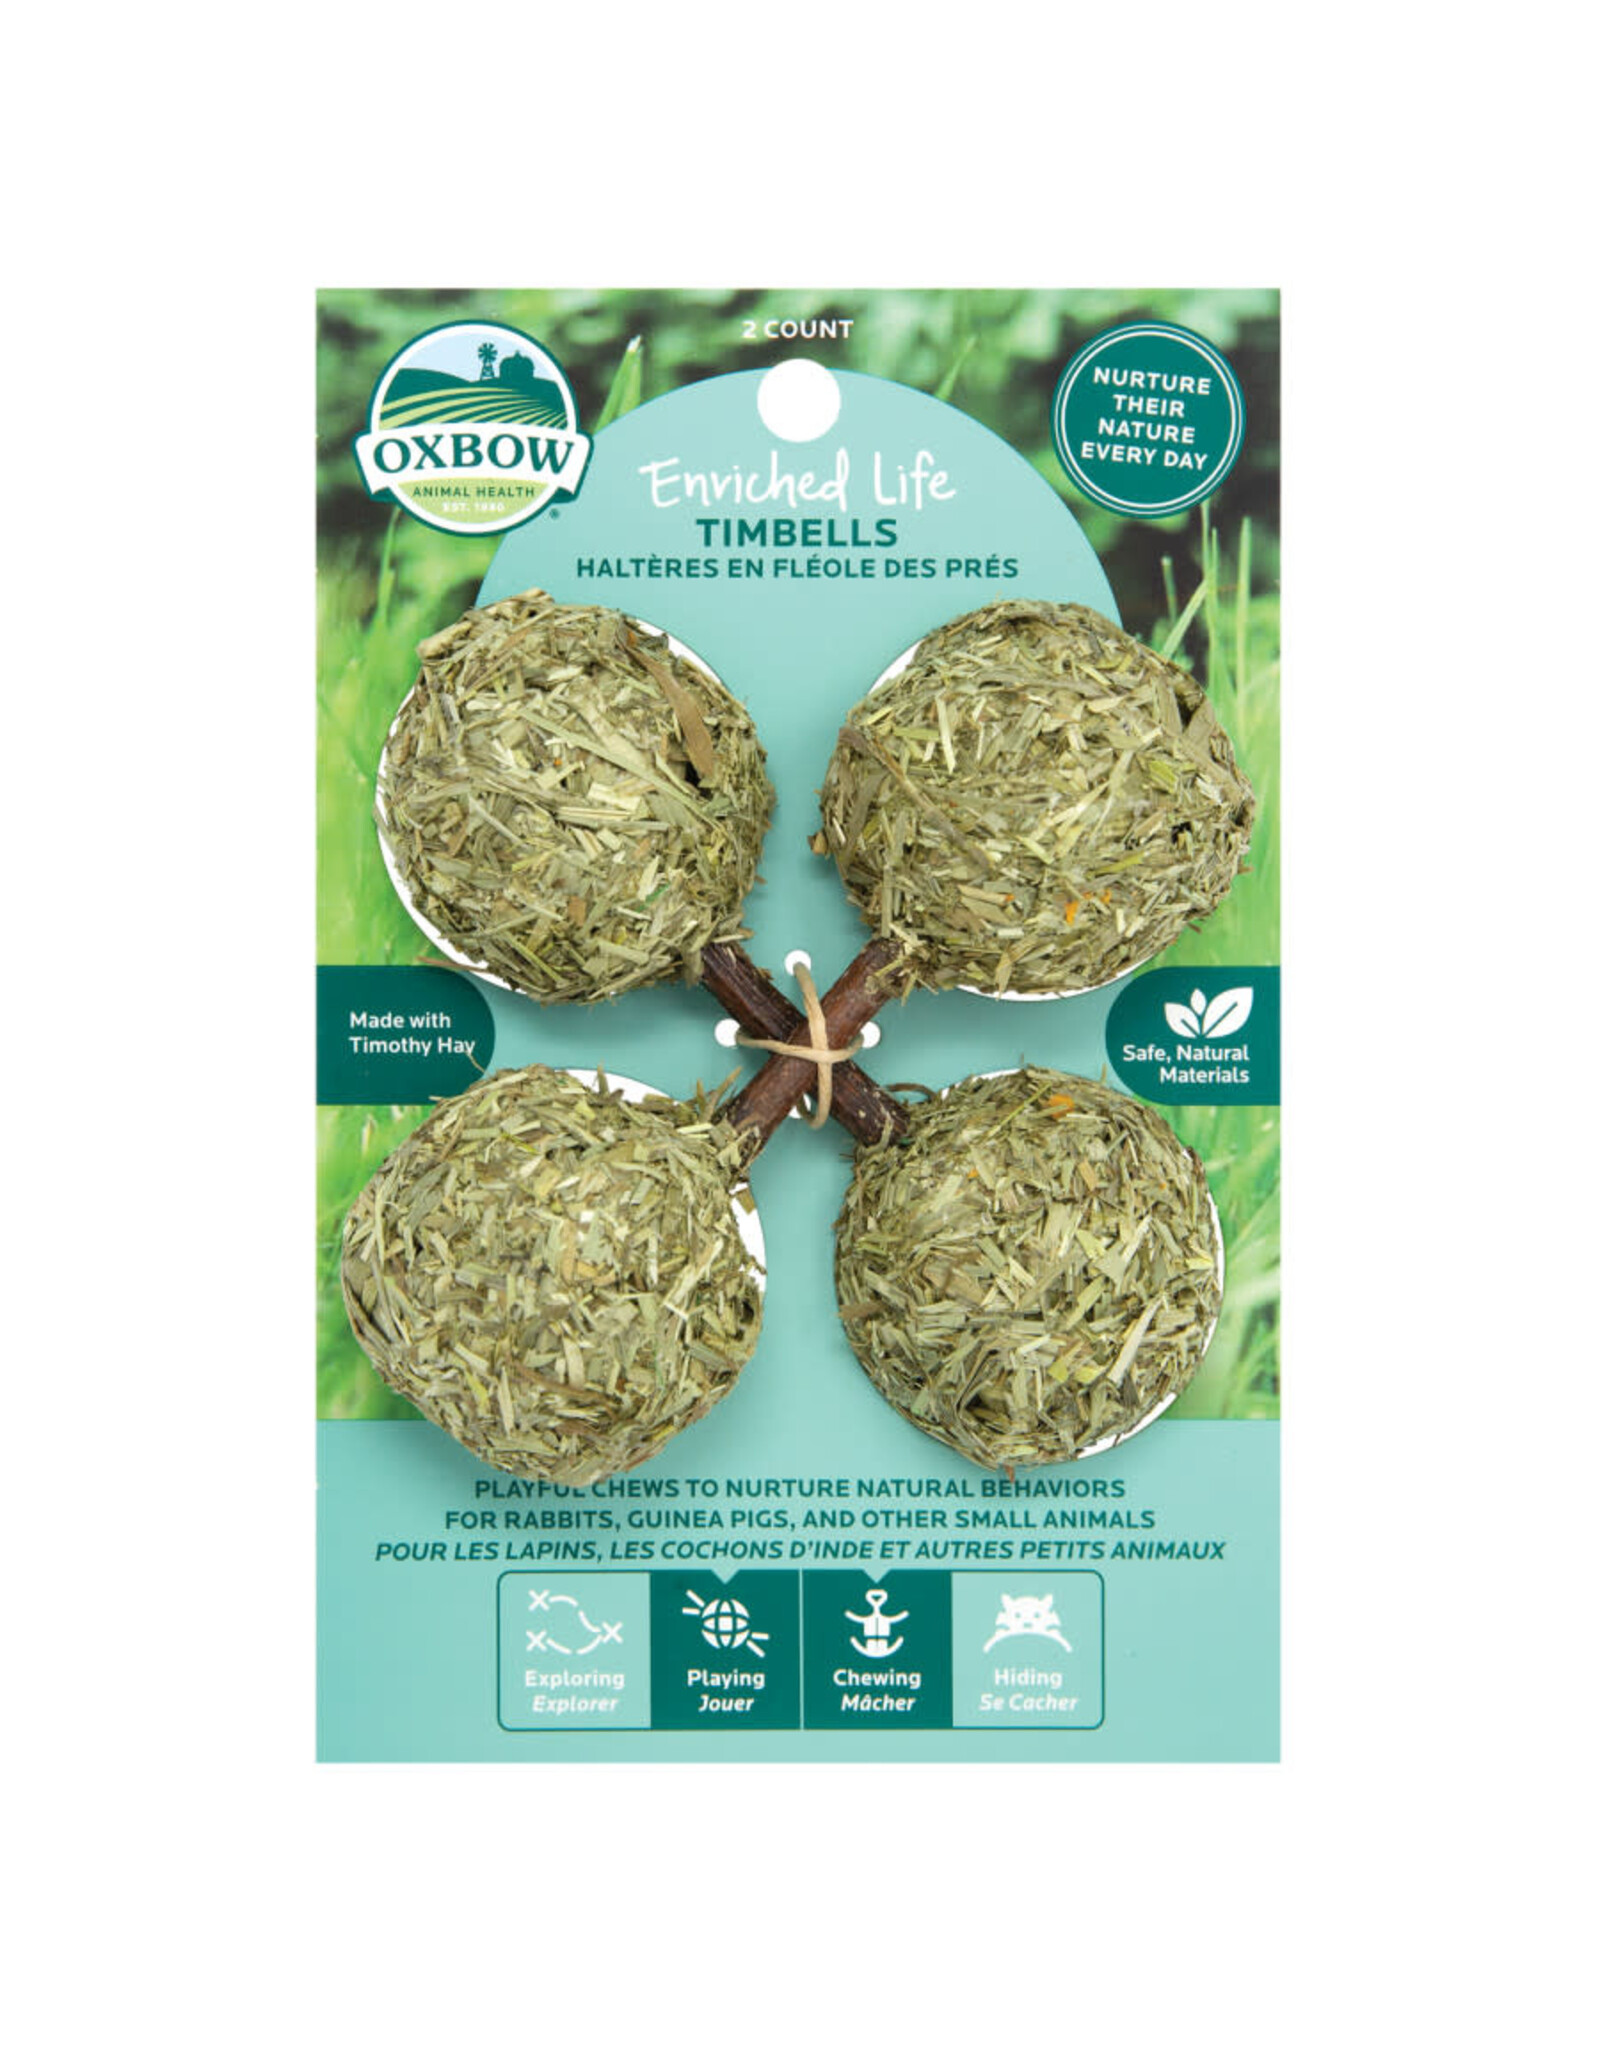 Oxbow Animal Health OXBOW ENRICHED LIFE TIMBELLS SMALL ANIMAL CHEW TOY 2-COUNT